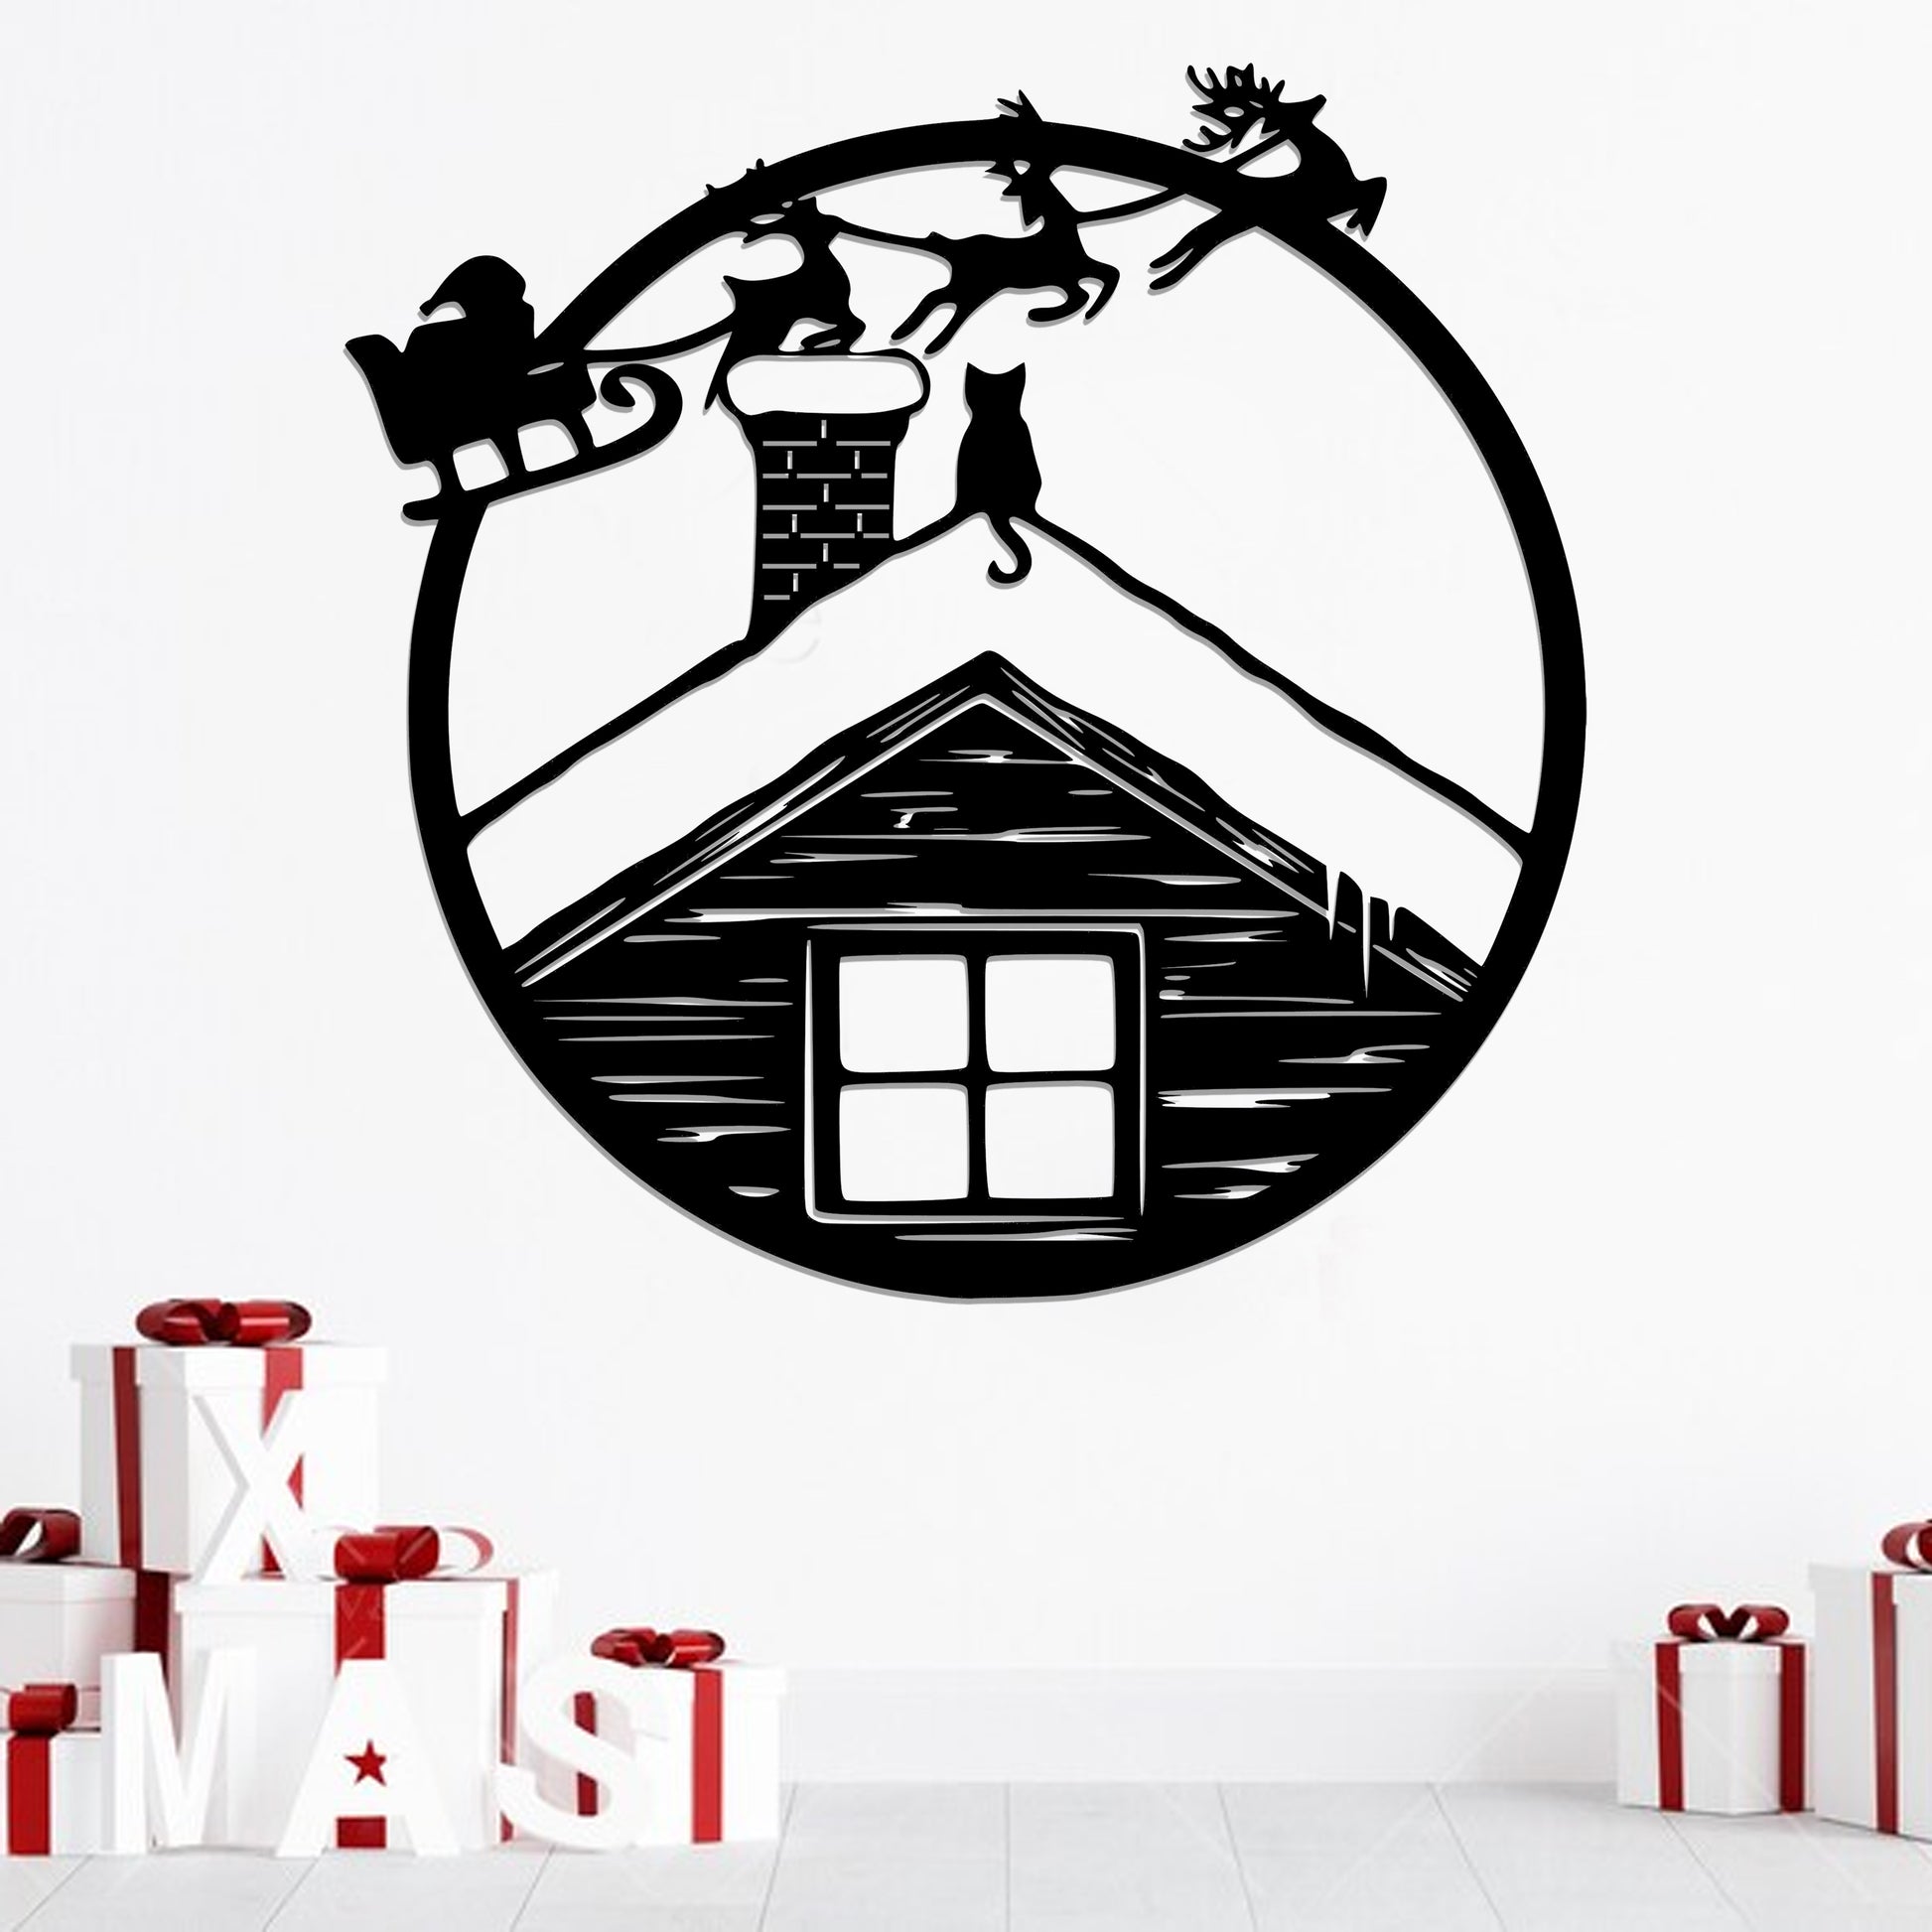 Santa Claus Flying Over Snow Capped Village Metal Sign - Metal Christmas Wall Art - Ciaocustom